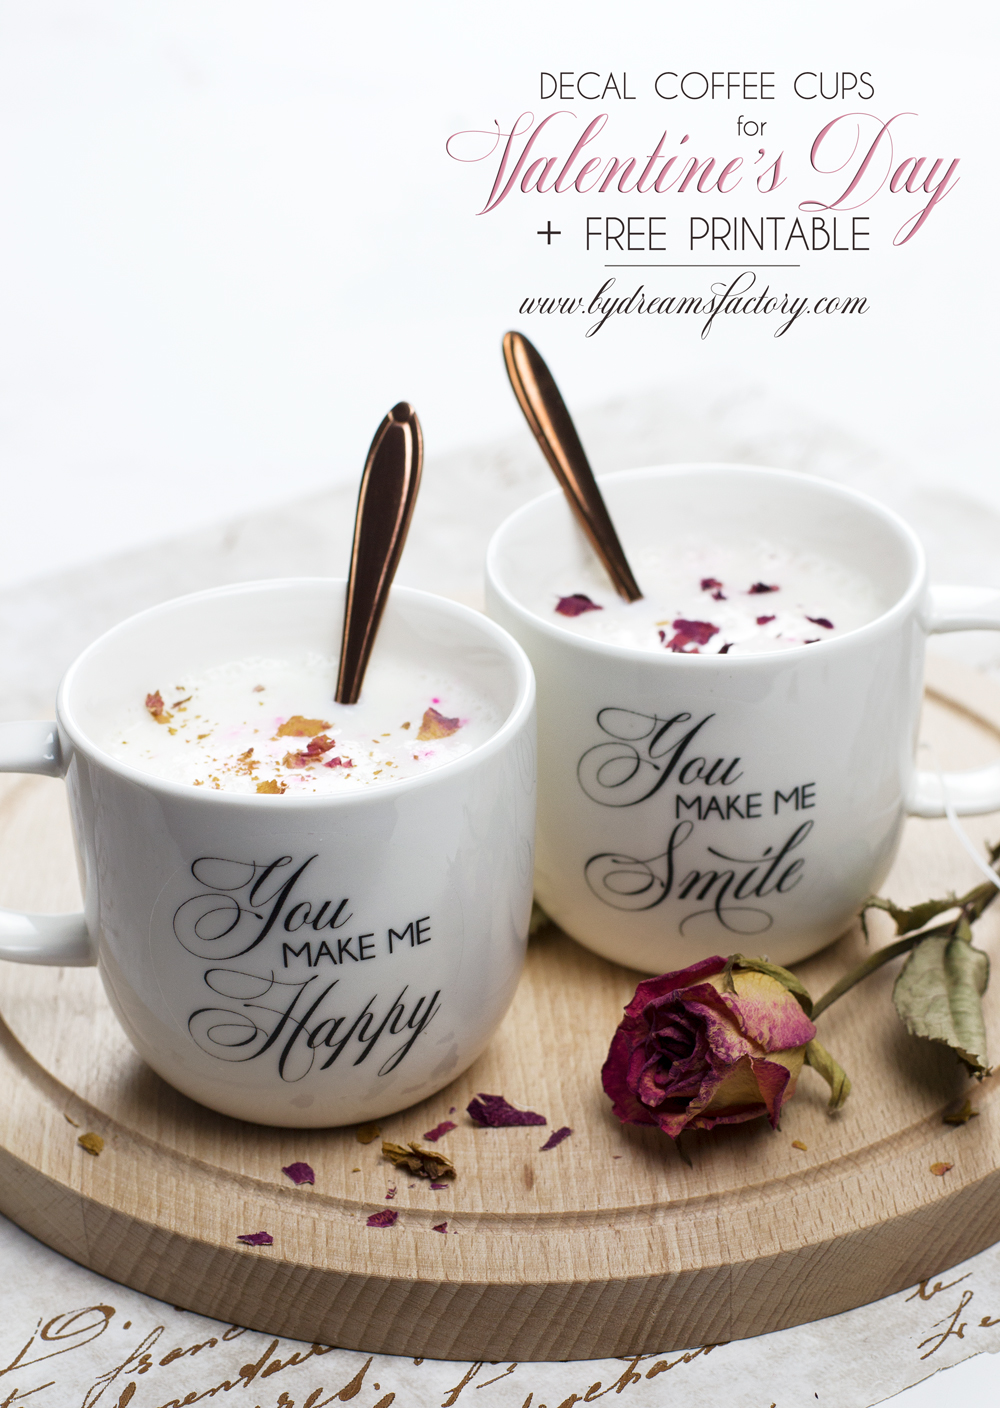 DIY Decal coffee cups for Valentine's Day + free printable